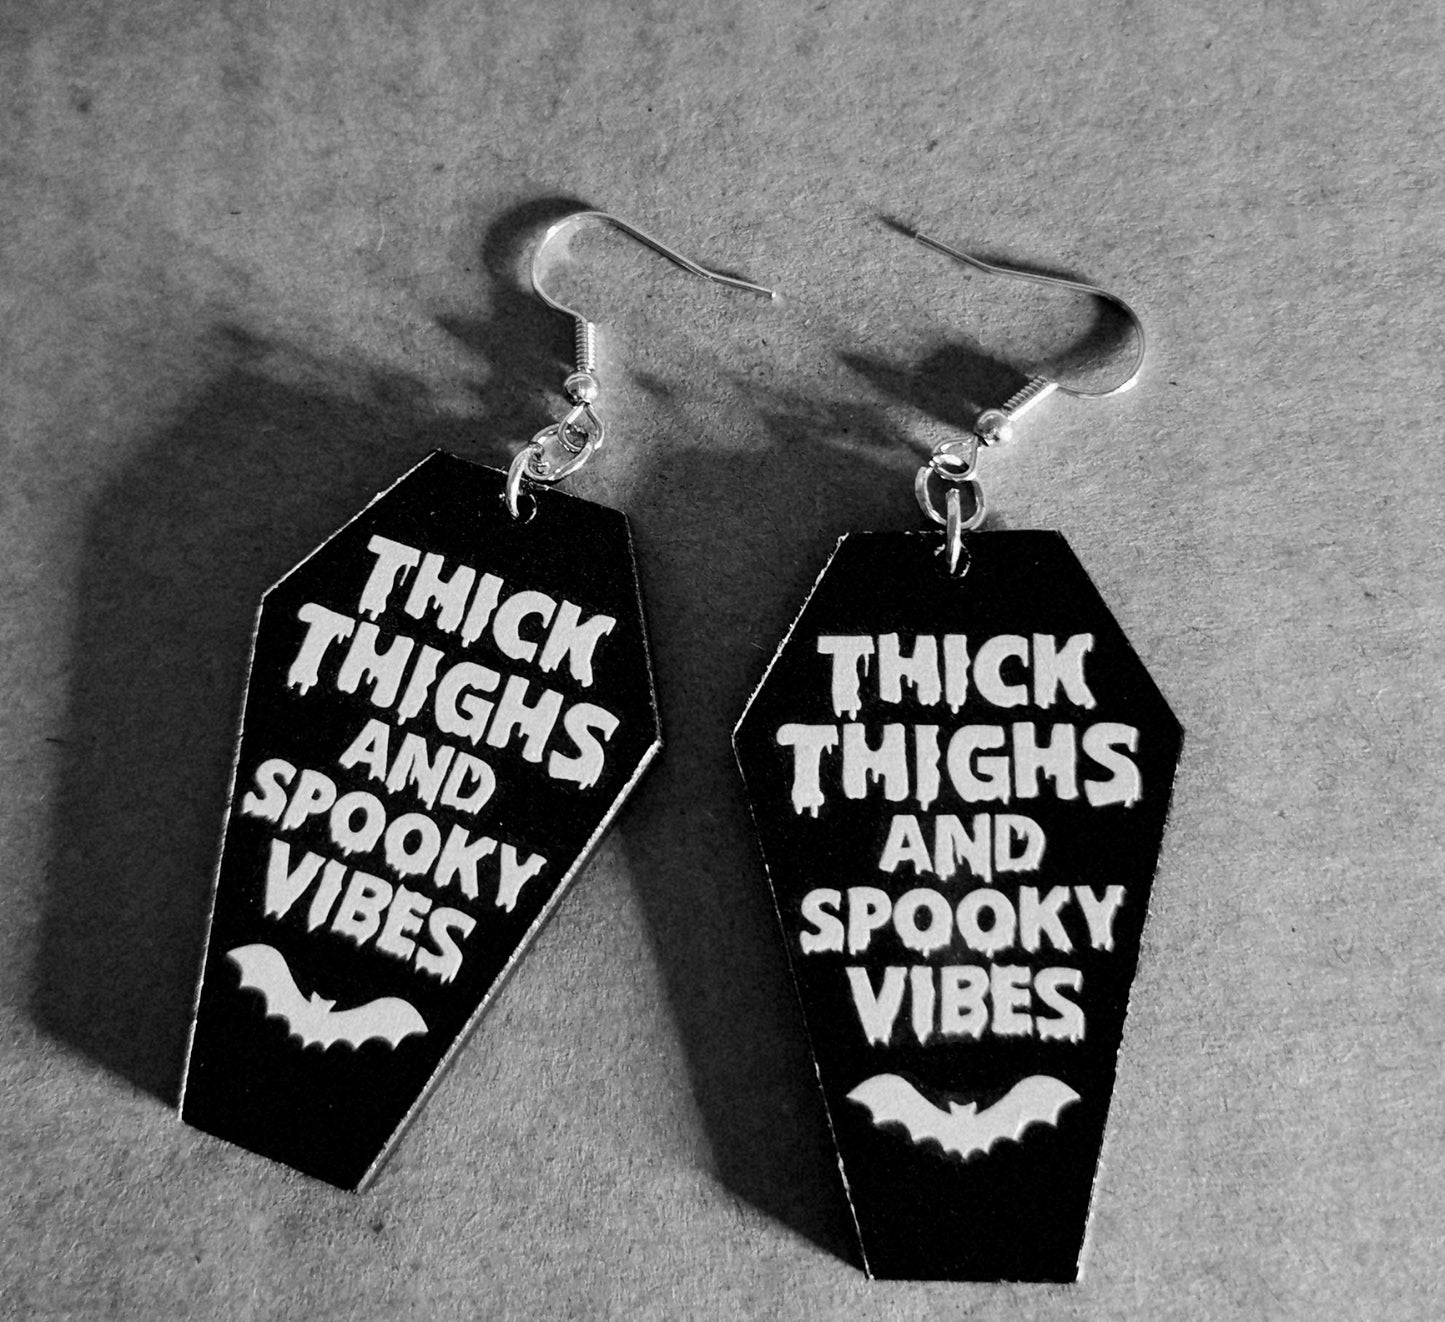 Thick Thighs and Spooky Vibes Earrings